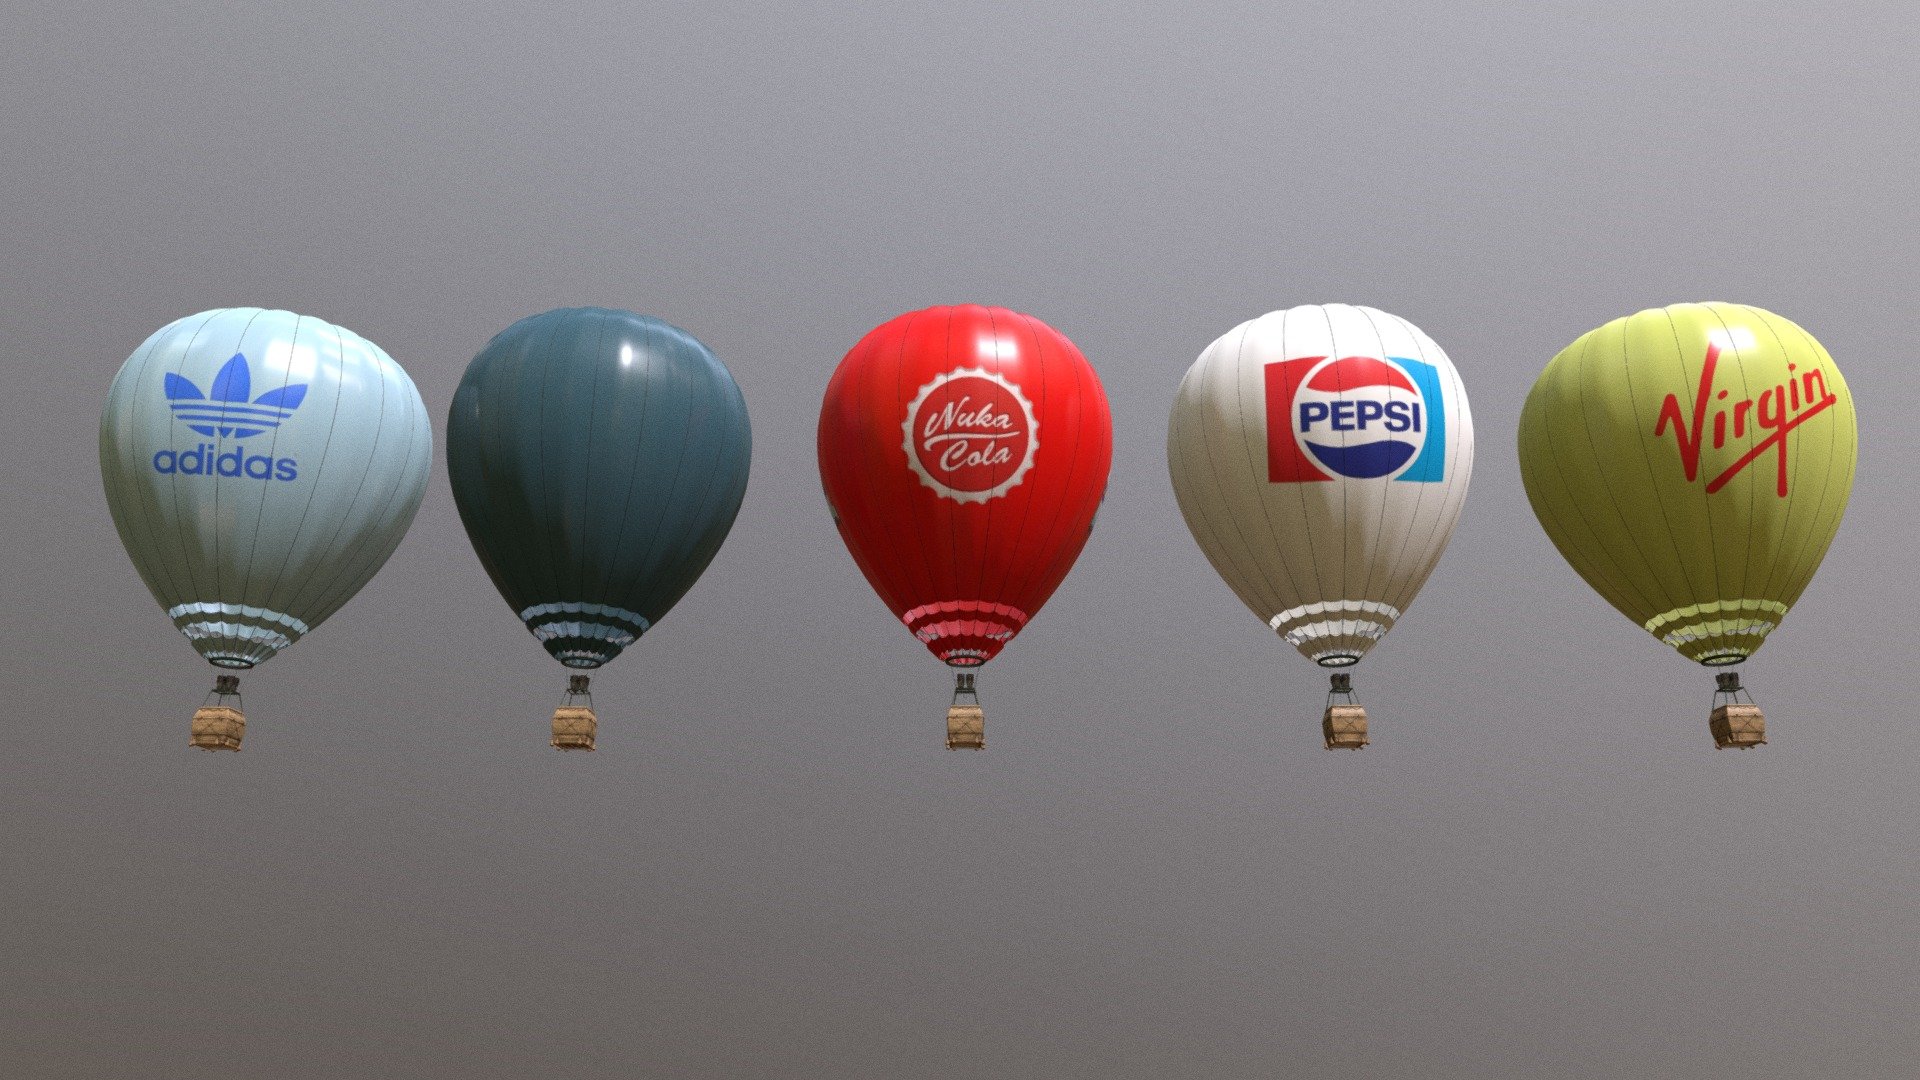 Hotairbaloon - Luftballon - Virgin

Hotairbaloon
gizmos ready uw ready with textures. plug and play.
Modeled in Blender. Game ready.
Substance painter 4K  textures or 4K original.

with love hand made textures in painter. Iam Historican,
Game ready model for unreal, unity engine. For scenes, videos, games.
4k PBR  textures in substance painter. Albedo, Metalic + rougness, Normal map. 
gizmos ready. You need somting ? PM me =)
ready for 3D printing
Blender 2.9 modeled
Blender 2.9 modeled
Substance painter original textures 2k res. 
Realstic scale asset and game ready.
Download includes:
2k &amp; 4k PBR textures
.blend file
.fbx - Hotairbaloon - Luftballon - pack - Buy Royalty Free 3D model by Thomas Binder (@bindertom61) 3d model